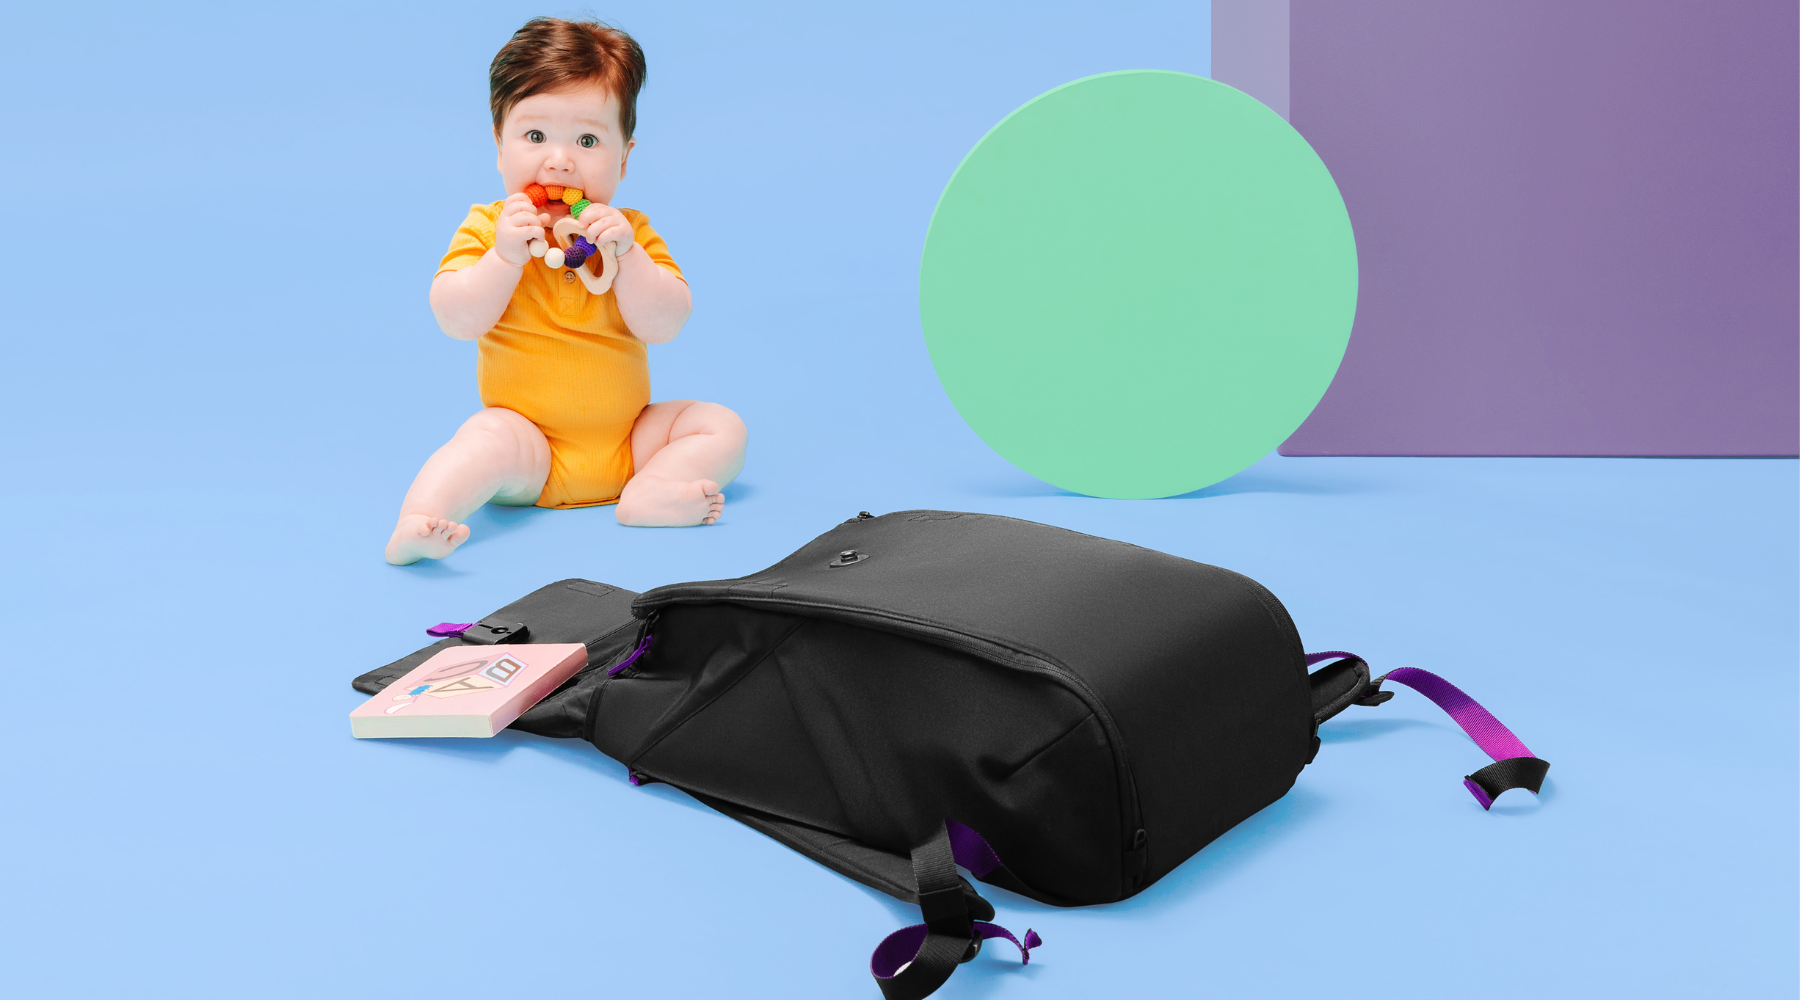 Diaper Bags 101: A Parent's Guide to Finding the Perfect One for Your Essentials